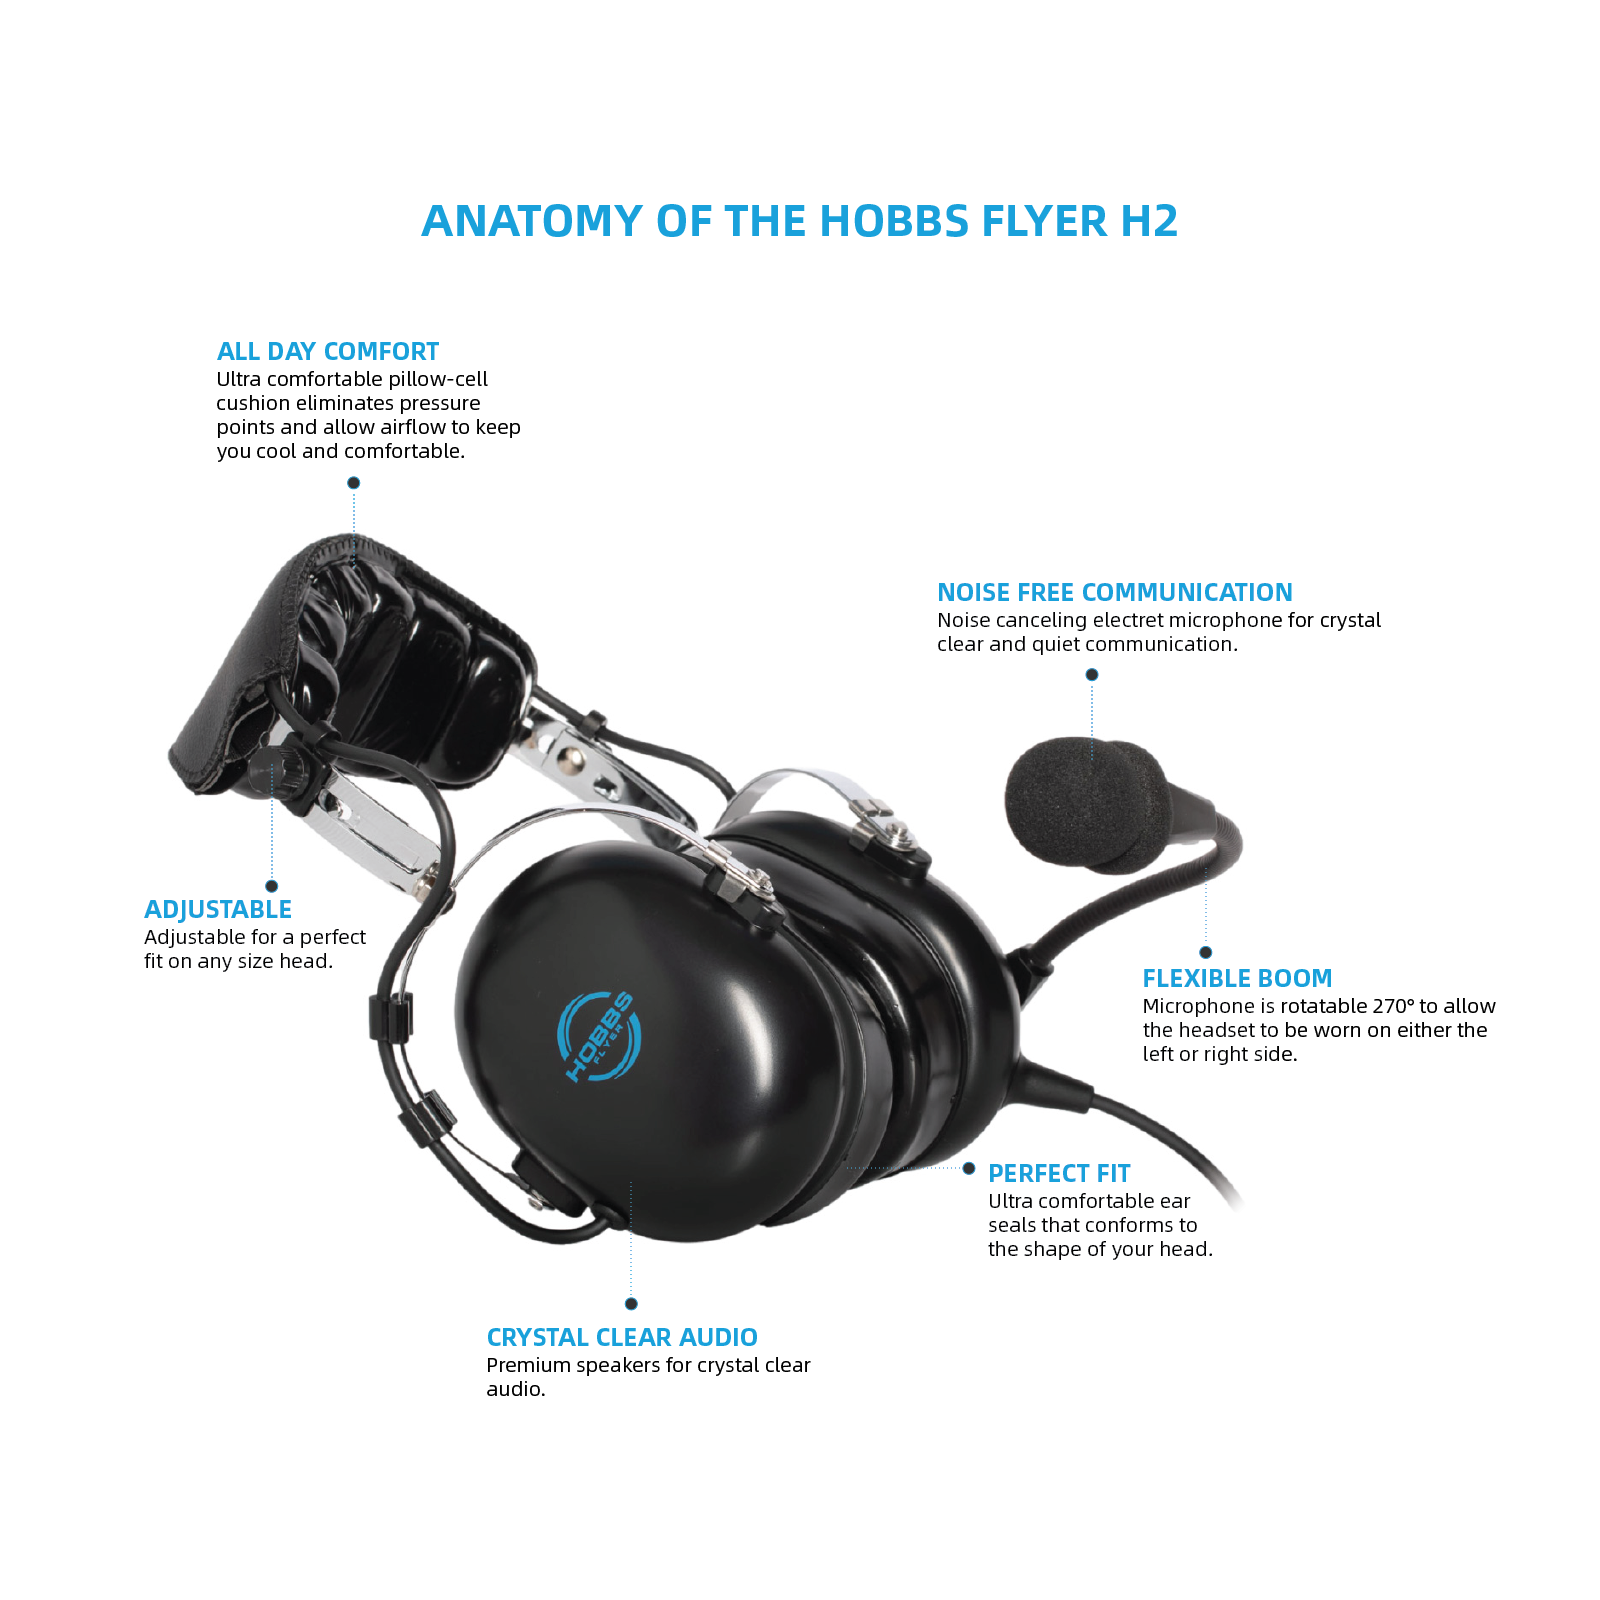 Hobbs Flyer H2 Active Noise Canceling Pilot Aviation Headset (with Bluetooth)